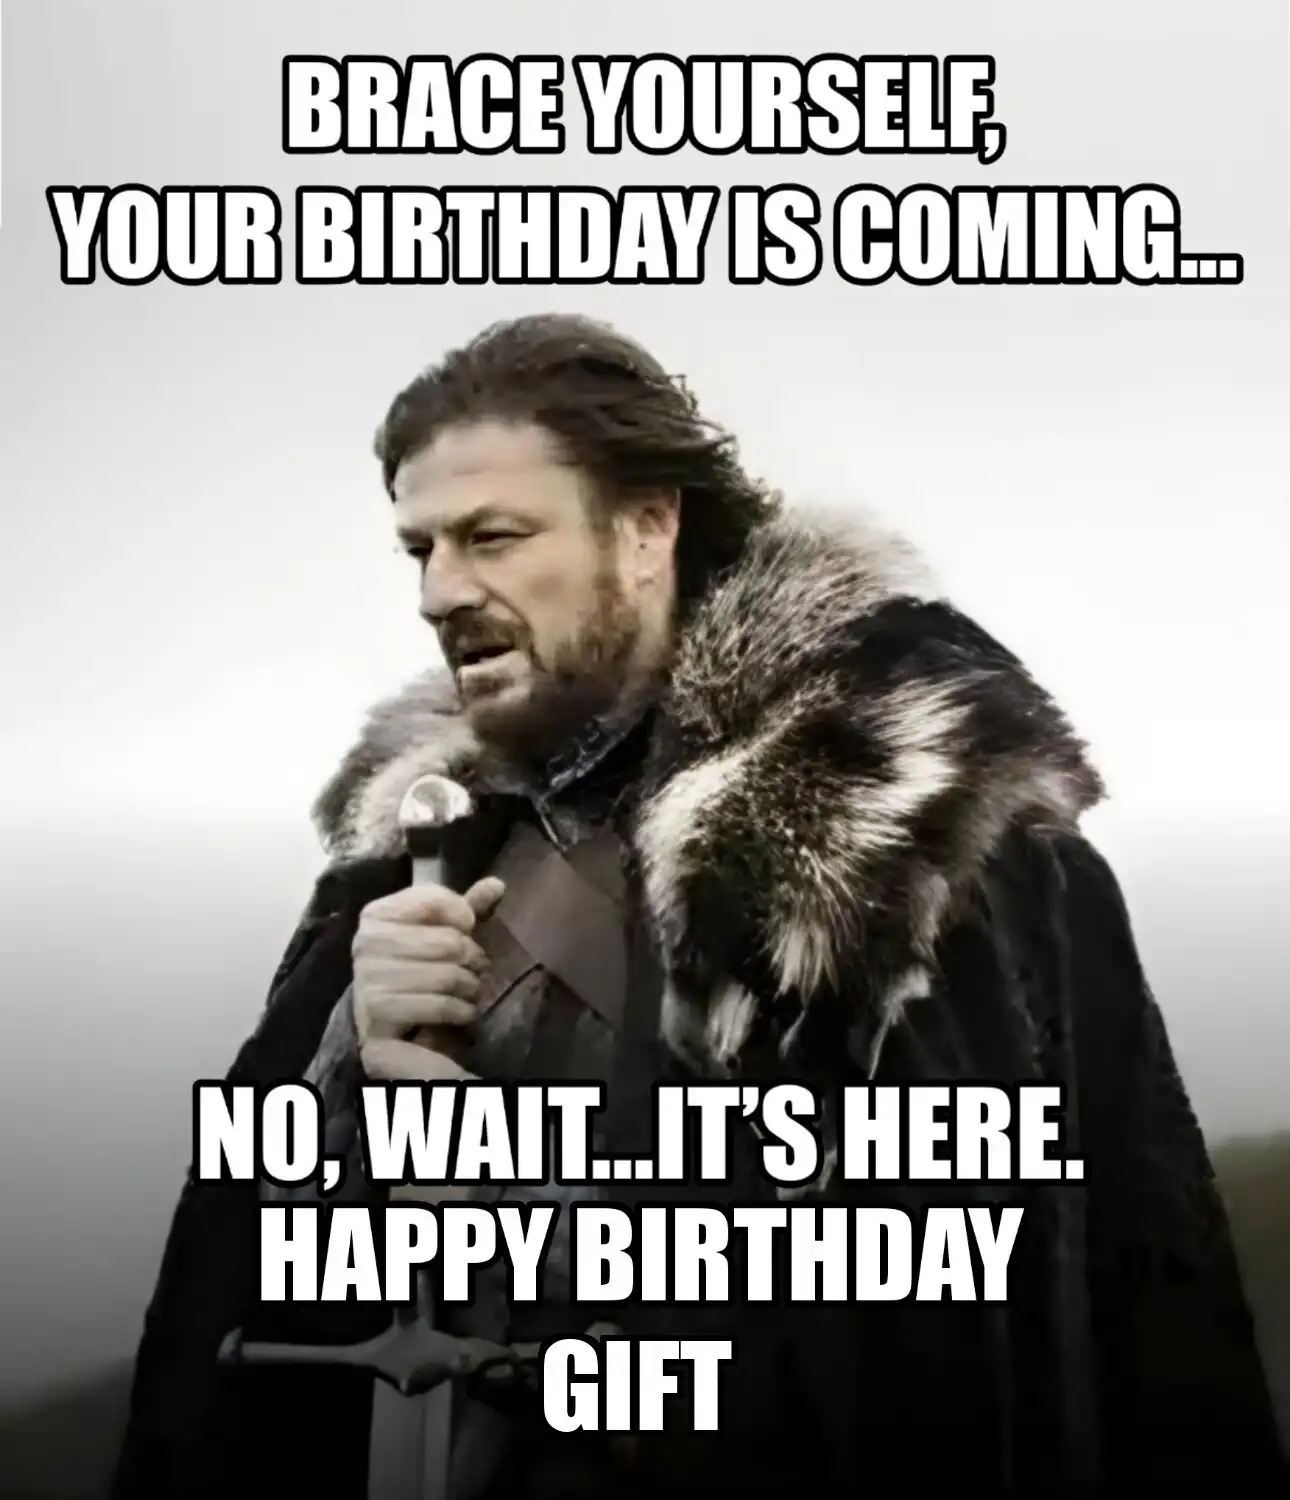 Happy Birthday Gift Brace Yourself Your Birthday Is Coming Meme